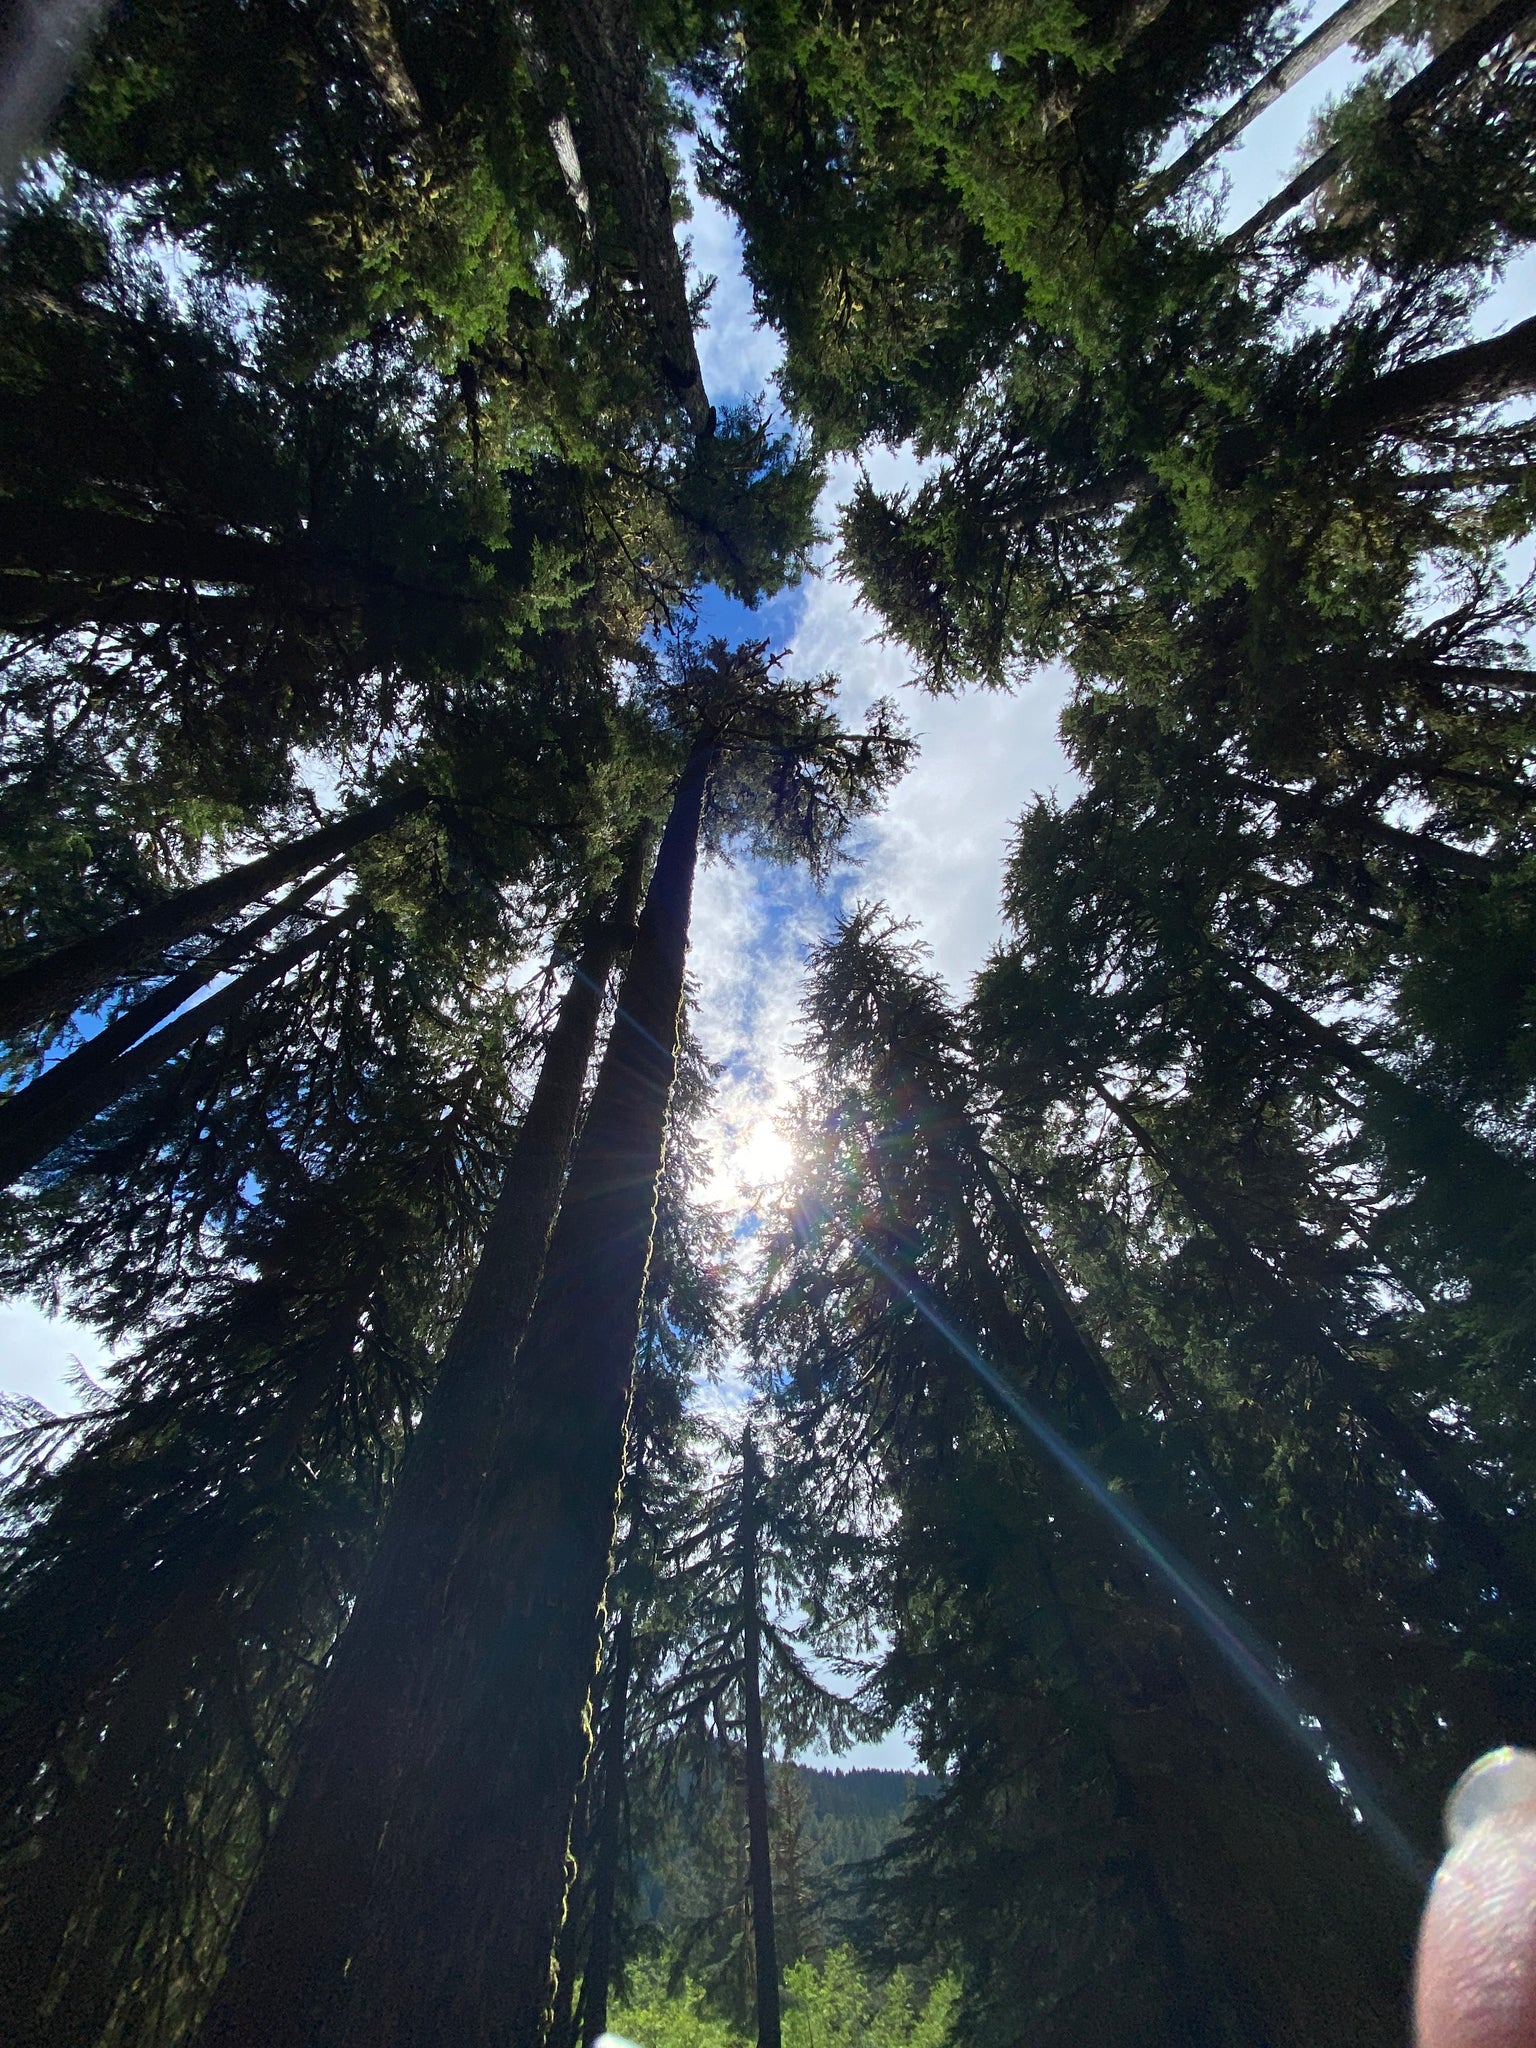 looking up from the forest floor among giant evergreens